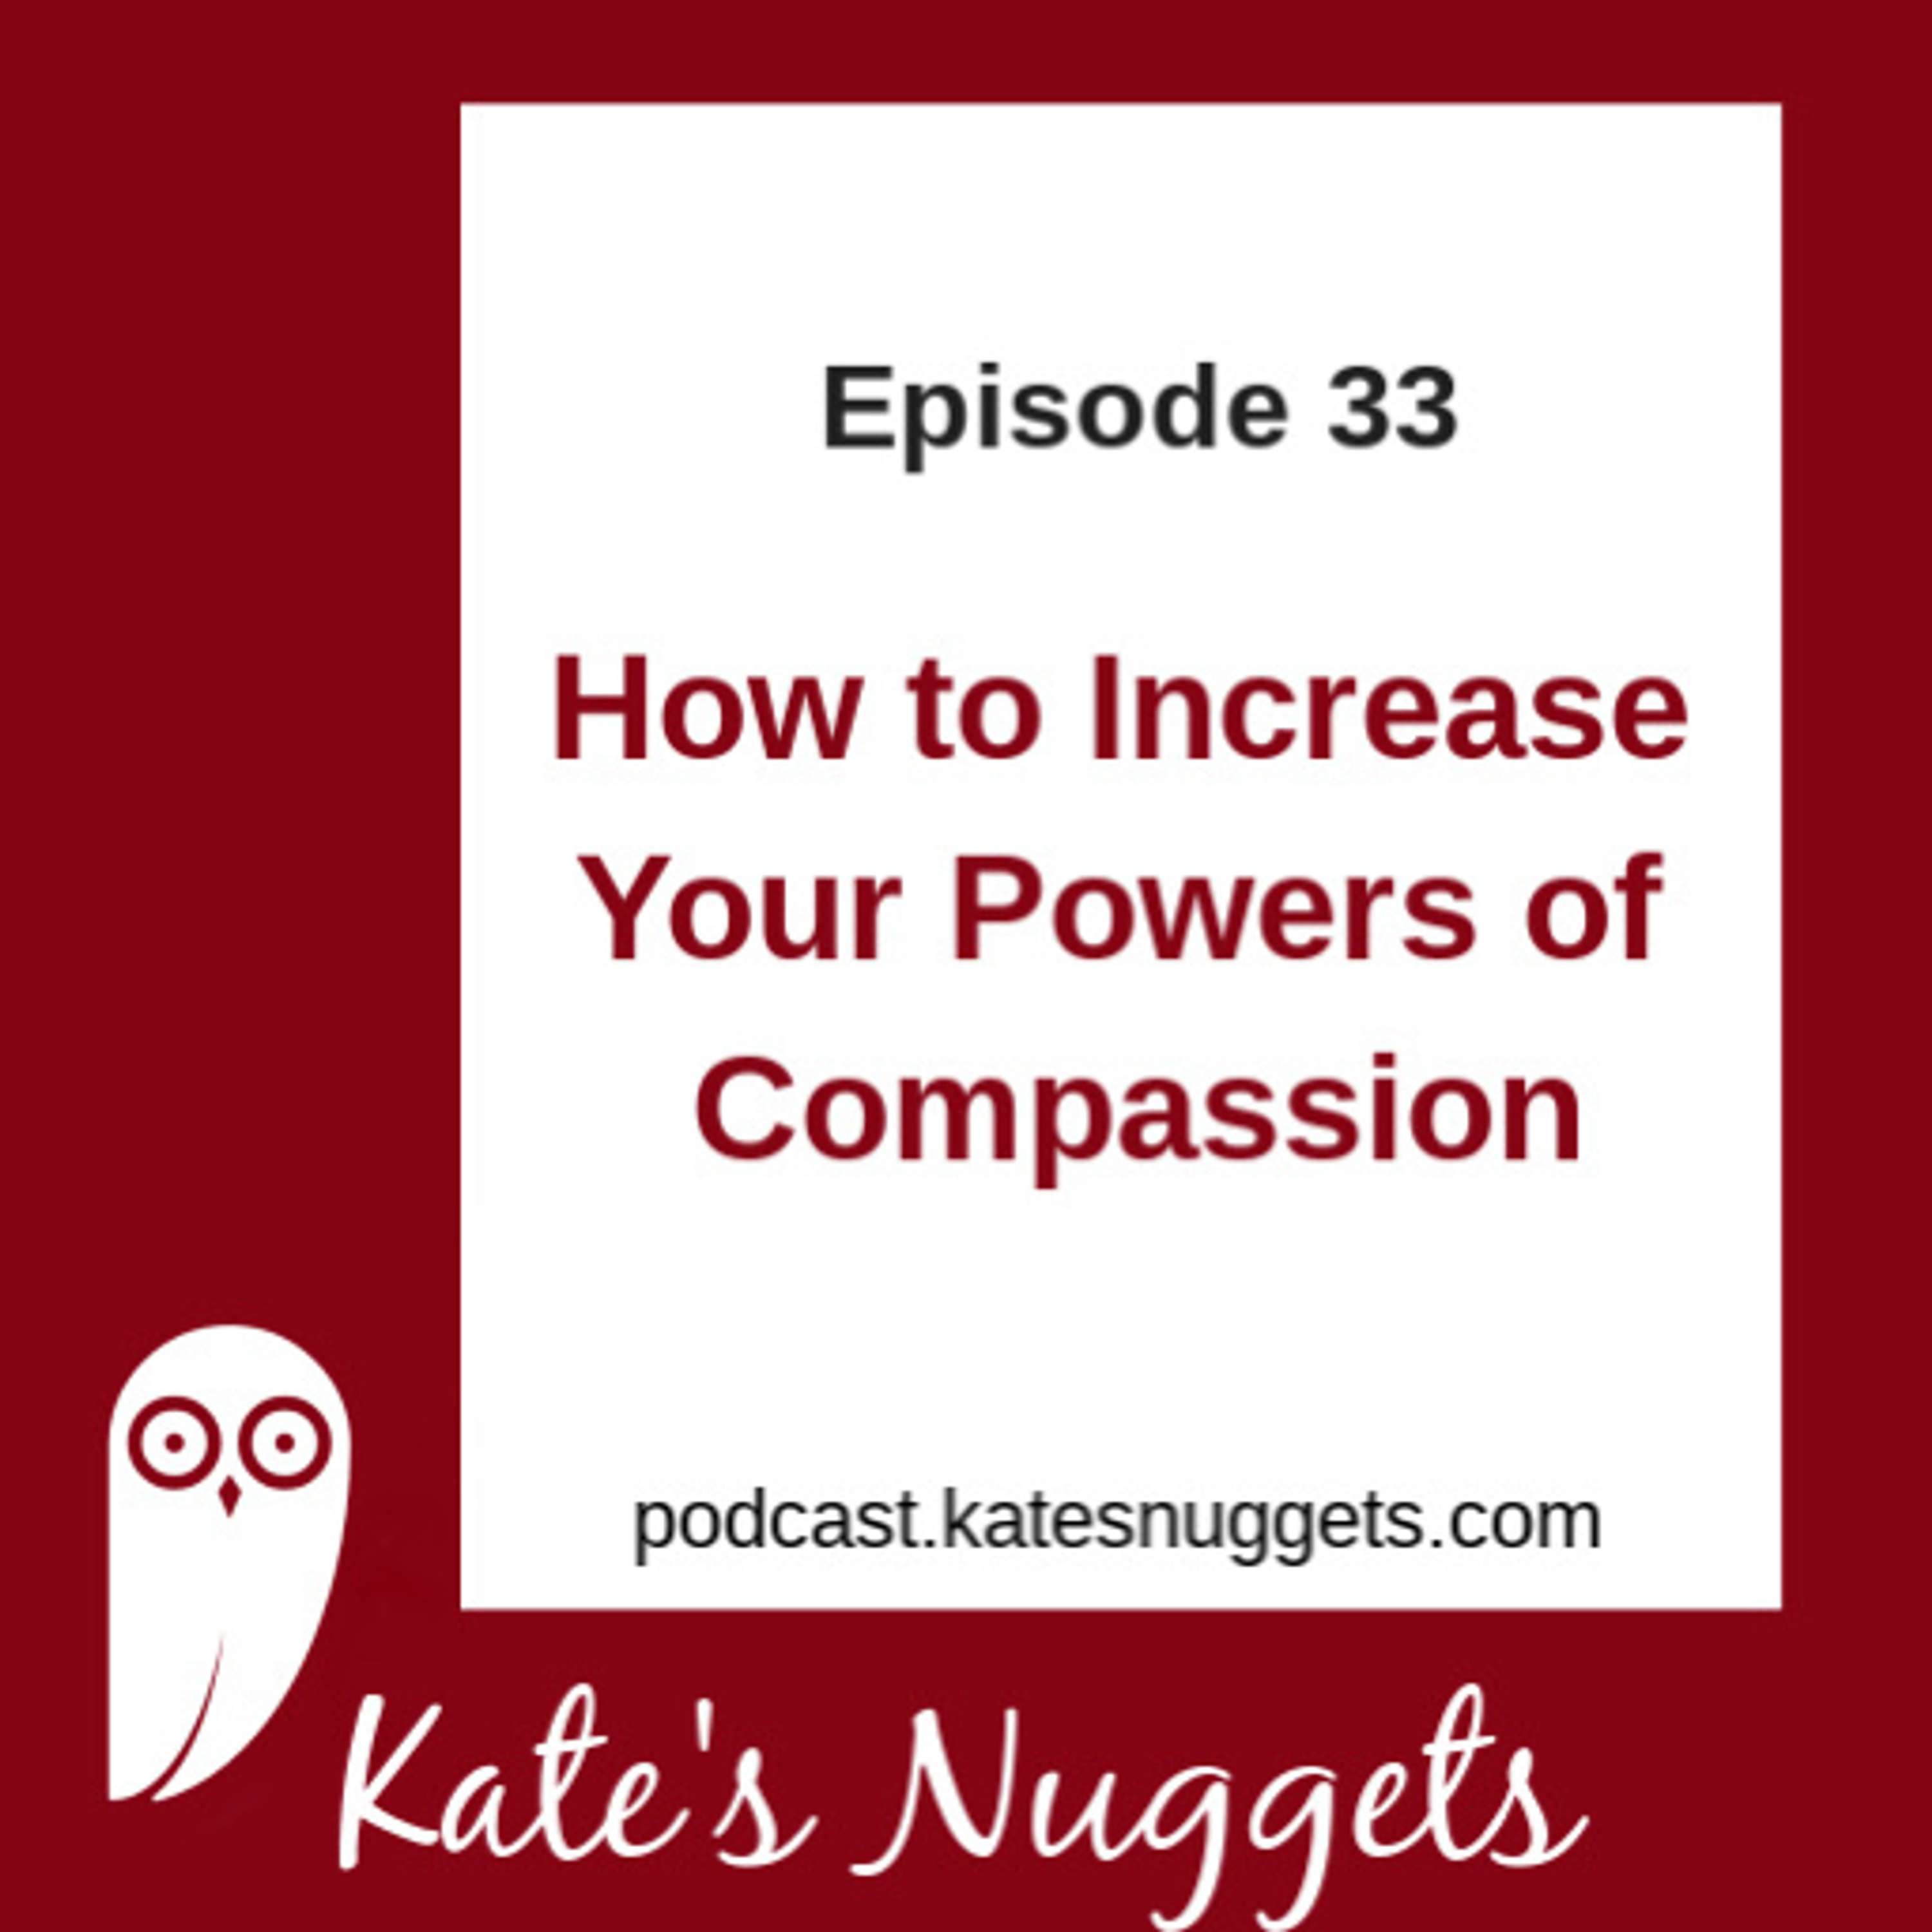 How to Increase Your Powers of Compassion